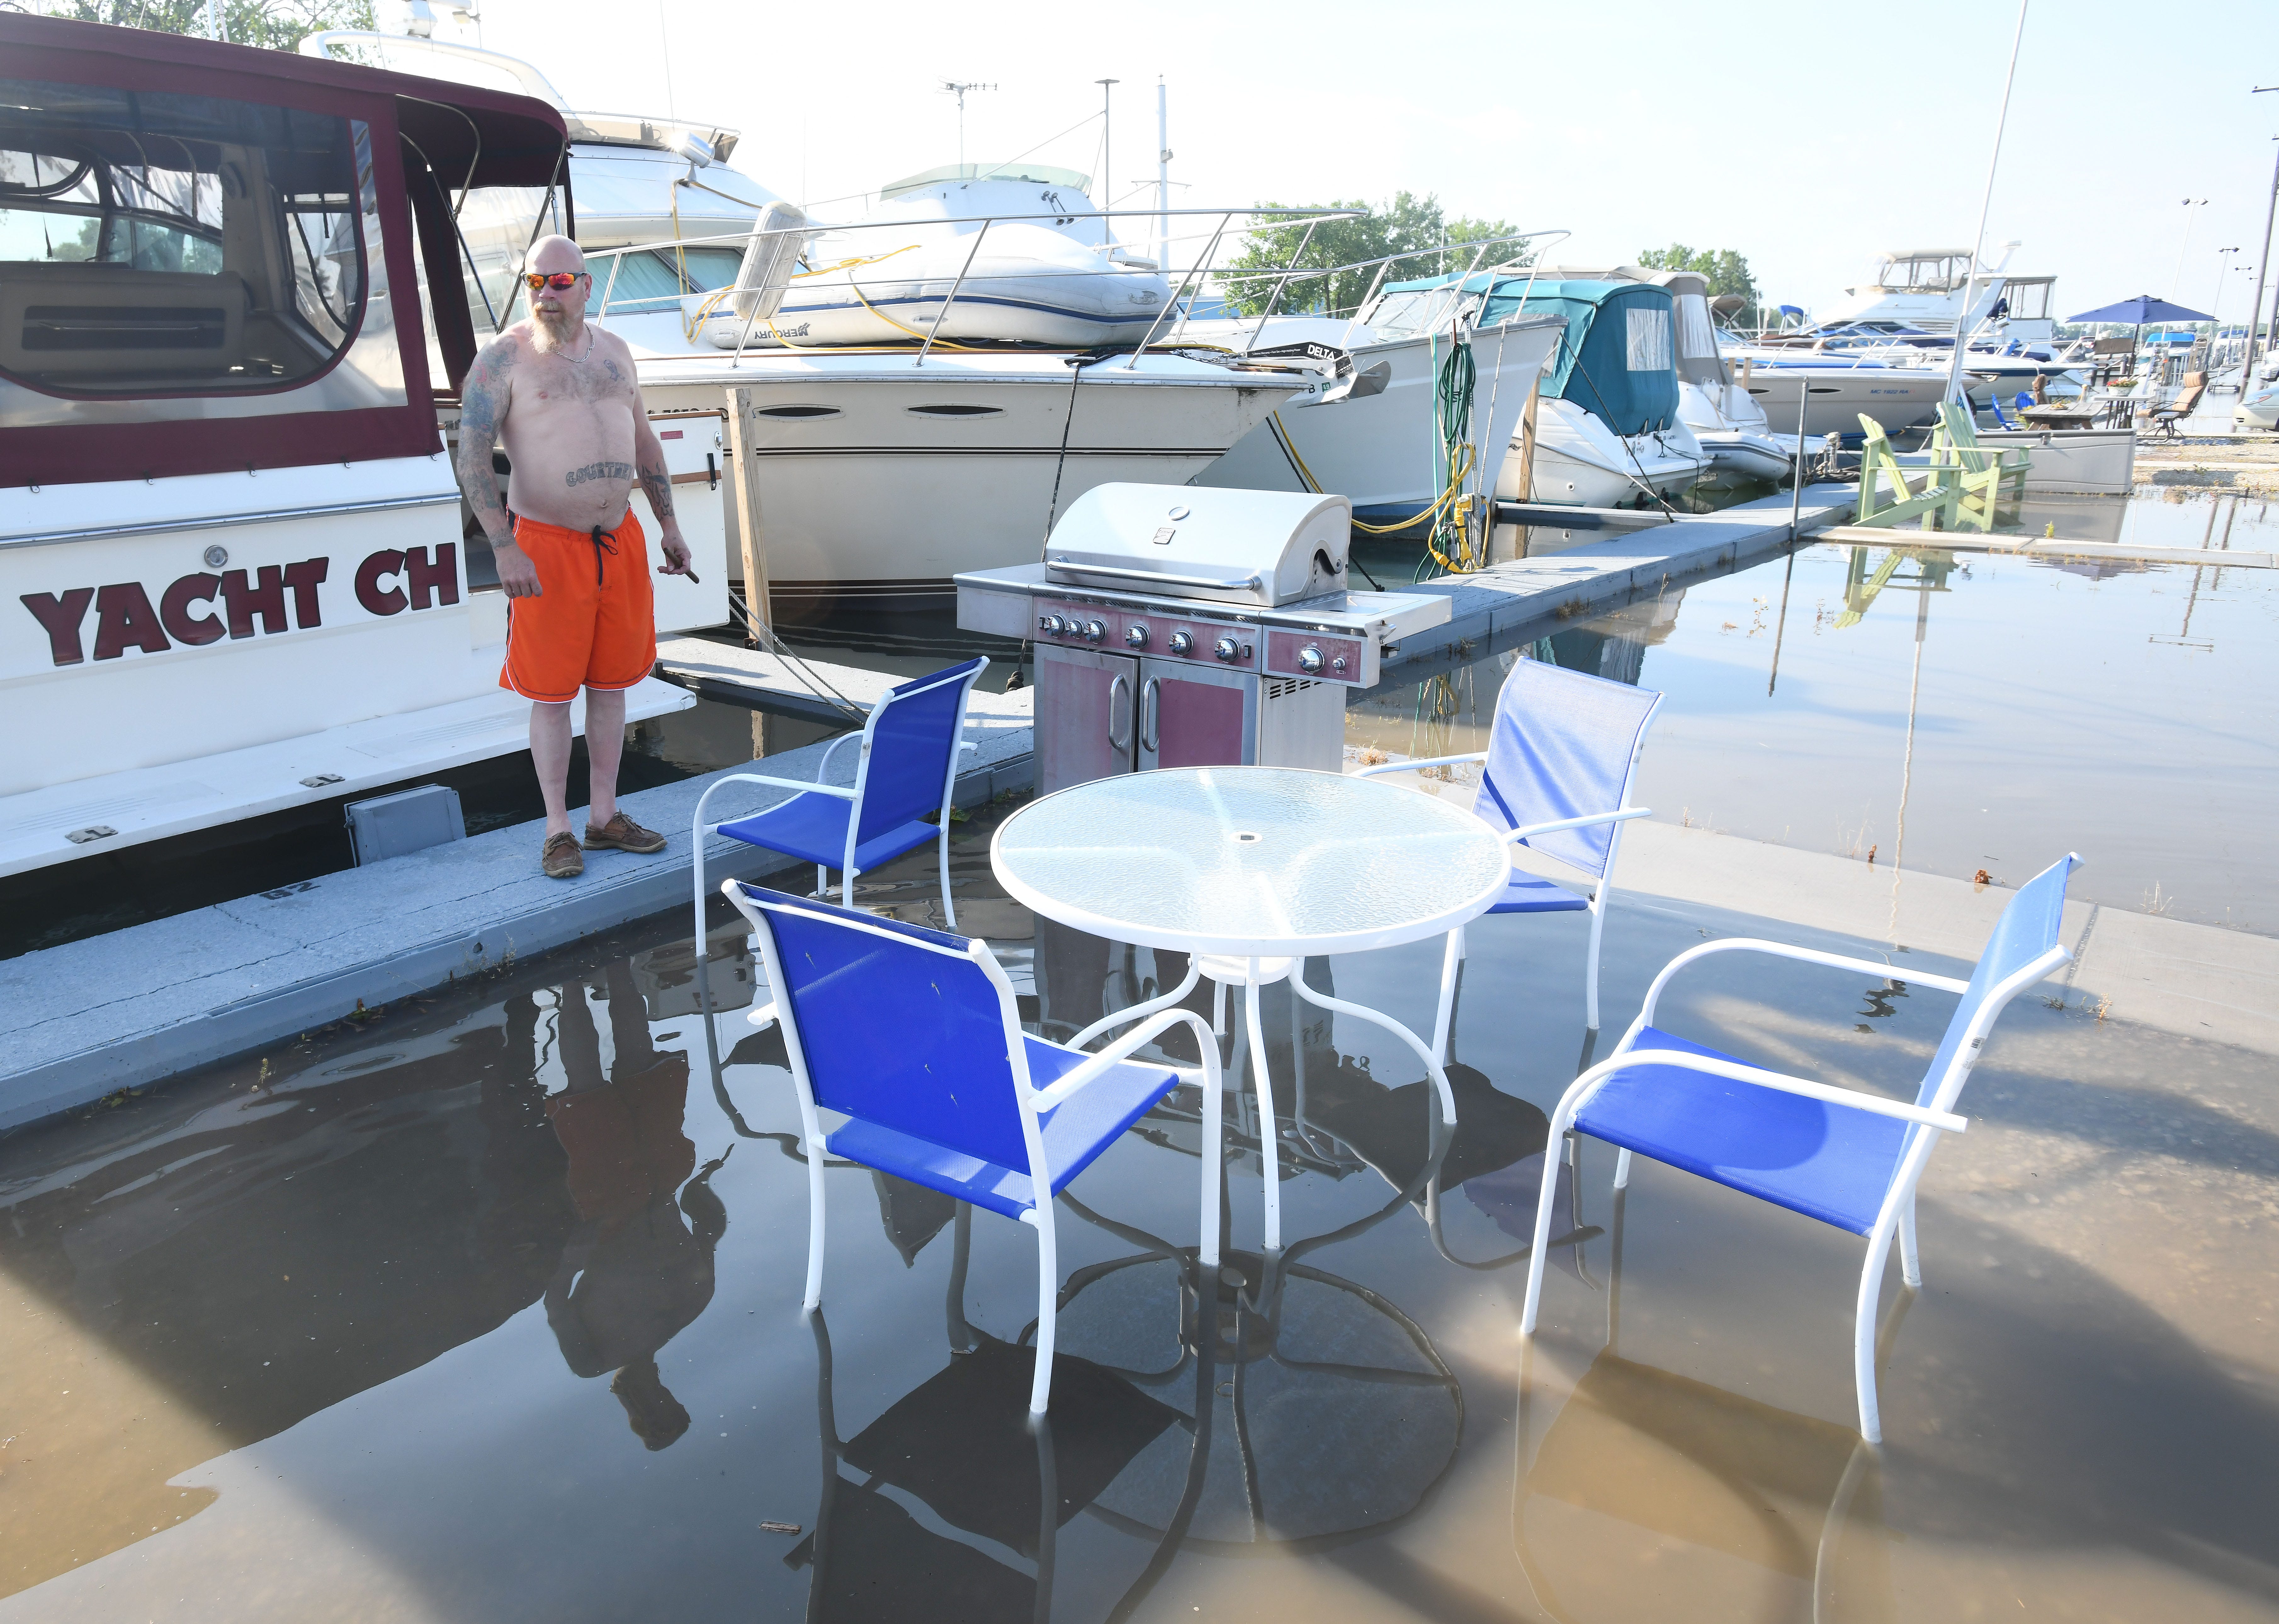 Willie Brown enjoys some time at his boat in the Humbug Marina in Gilbralar but finds his table, chairs and grill in water in what is usually a dry parking lot.